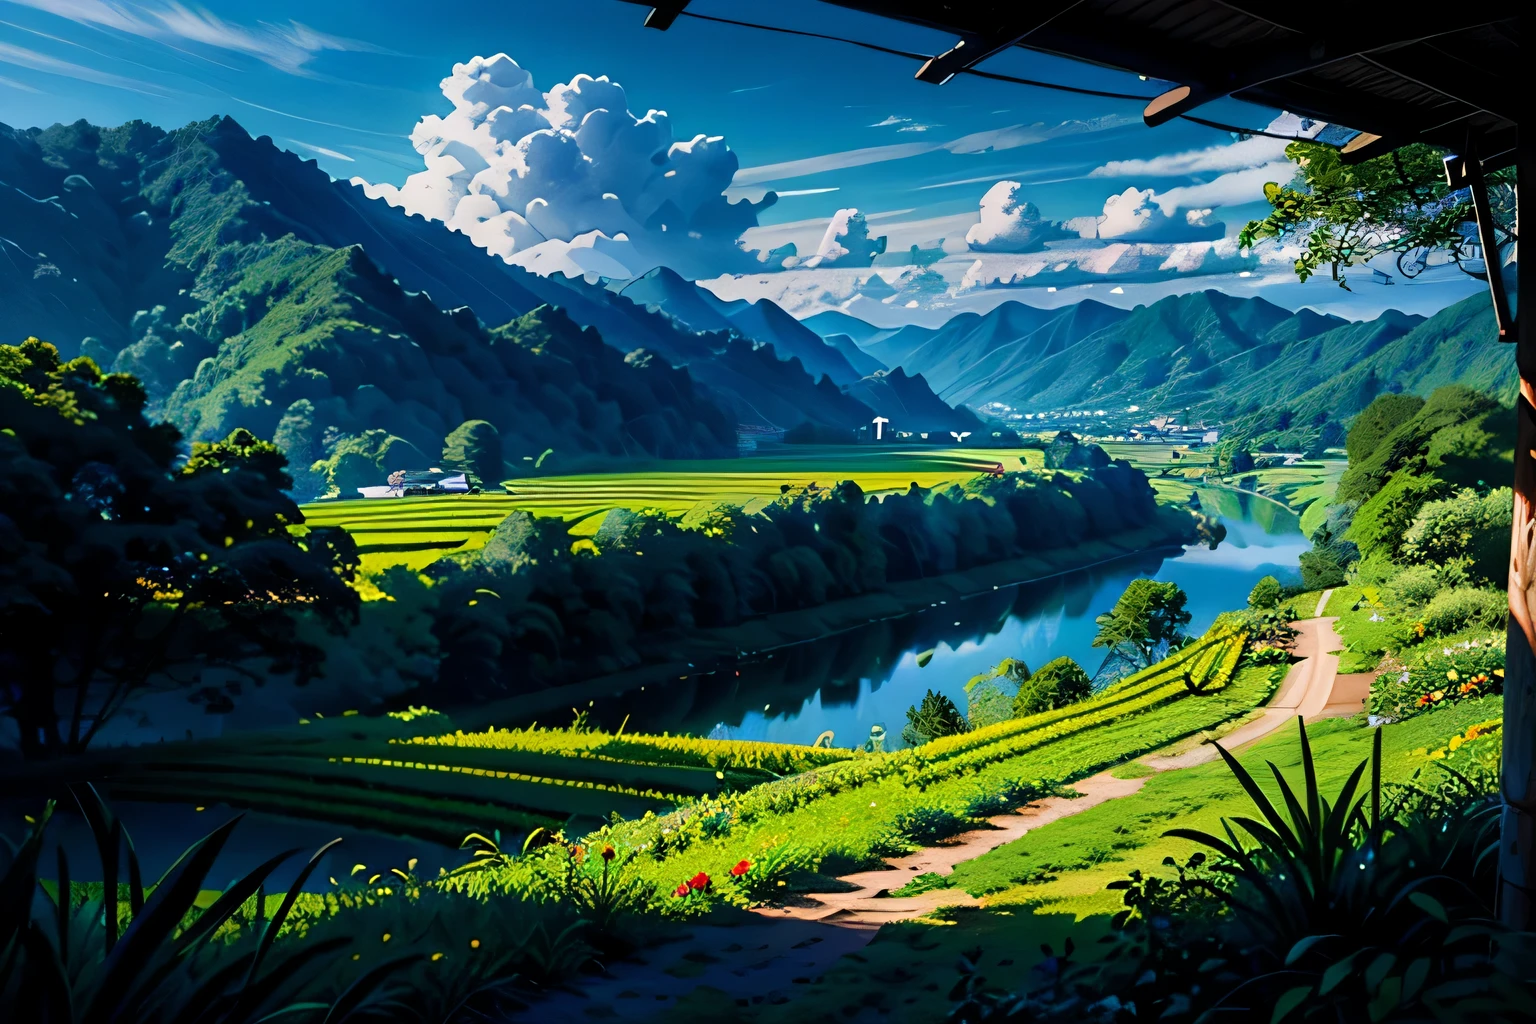 (best quality,4K,8K,high resolution,masterpiece:1.2),super detailed,current,photocurrent:1.37,Southeast Asia,stairs,farmer,2 chickens,Vietnam,Farm Life,Fertile land,Rice terraces,Traditional agriculture,harvest season,greening,peaceful scenery,Hard working without complaint，No regrets,traditional clothing,Working on the farm,sturdy bamboo hat,peaceful atmosphere,farm,vibrant culture,Colorful traditional houses,A rich heritage,great scenery,Dense vegetation,rice harvest,Modern agricultural technology,sunlight through leaves,buffalo grazing,neighborhood,Daily farm work,simple life,sustainable agricultural practices,From farm to table,fresh organic produce,farmer,Real experience,Serene countryside